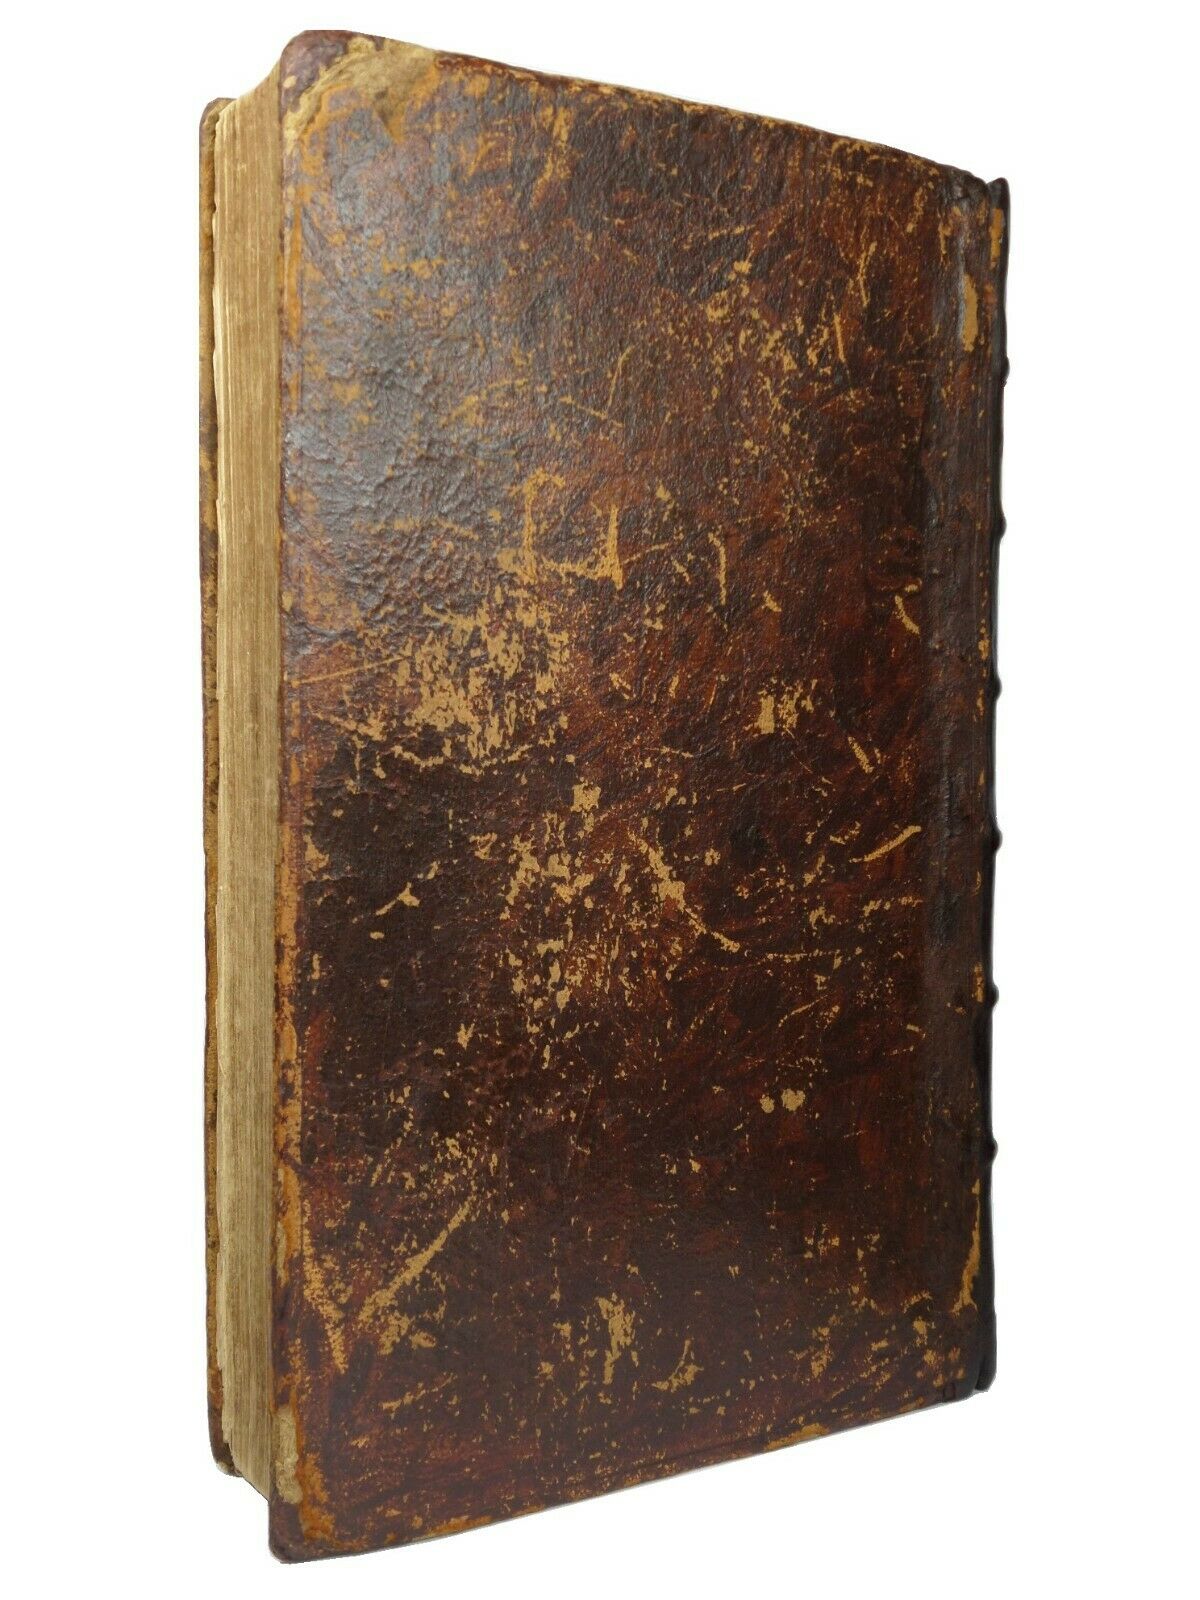 THE WORKS OF JEFFREY CHAUCER 1687 Edited by Thomas Speght